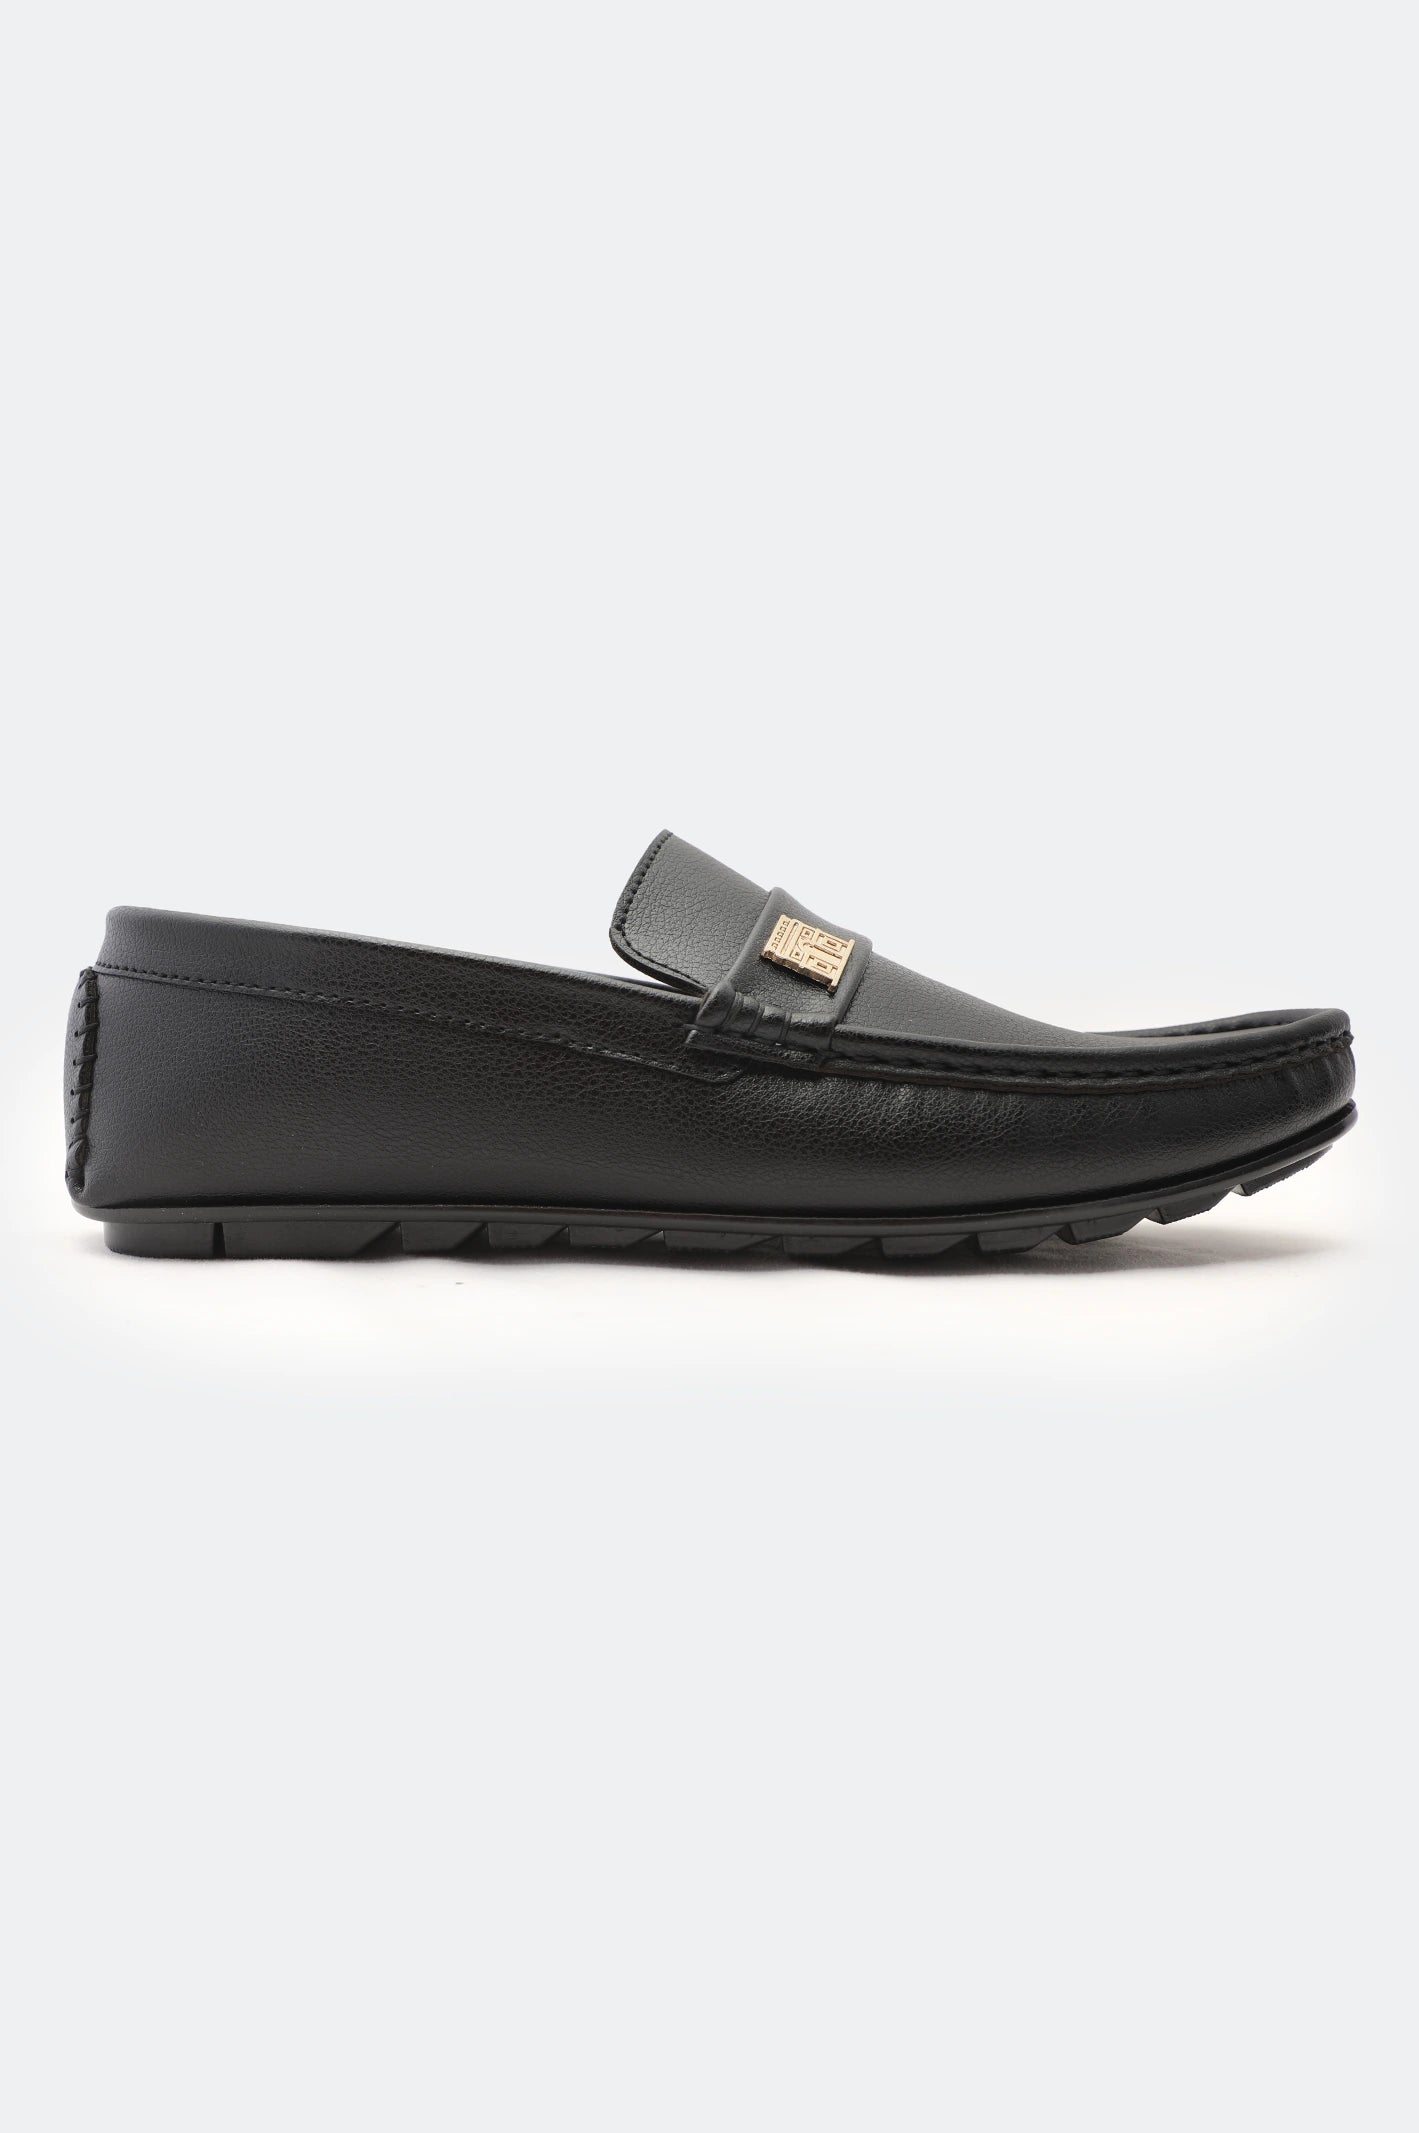 Black Casual Shoes For Men From Diners